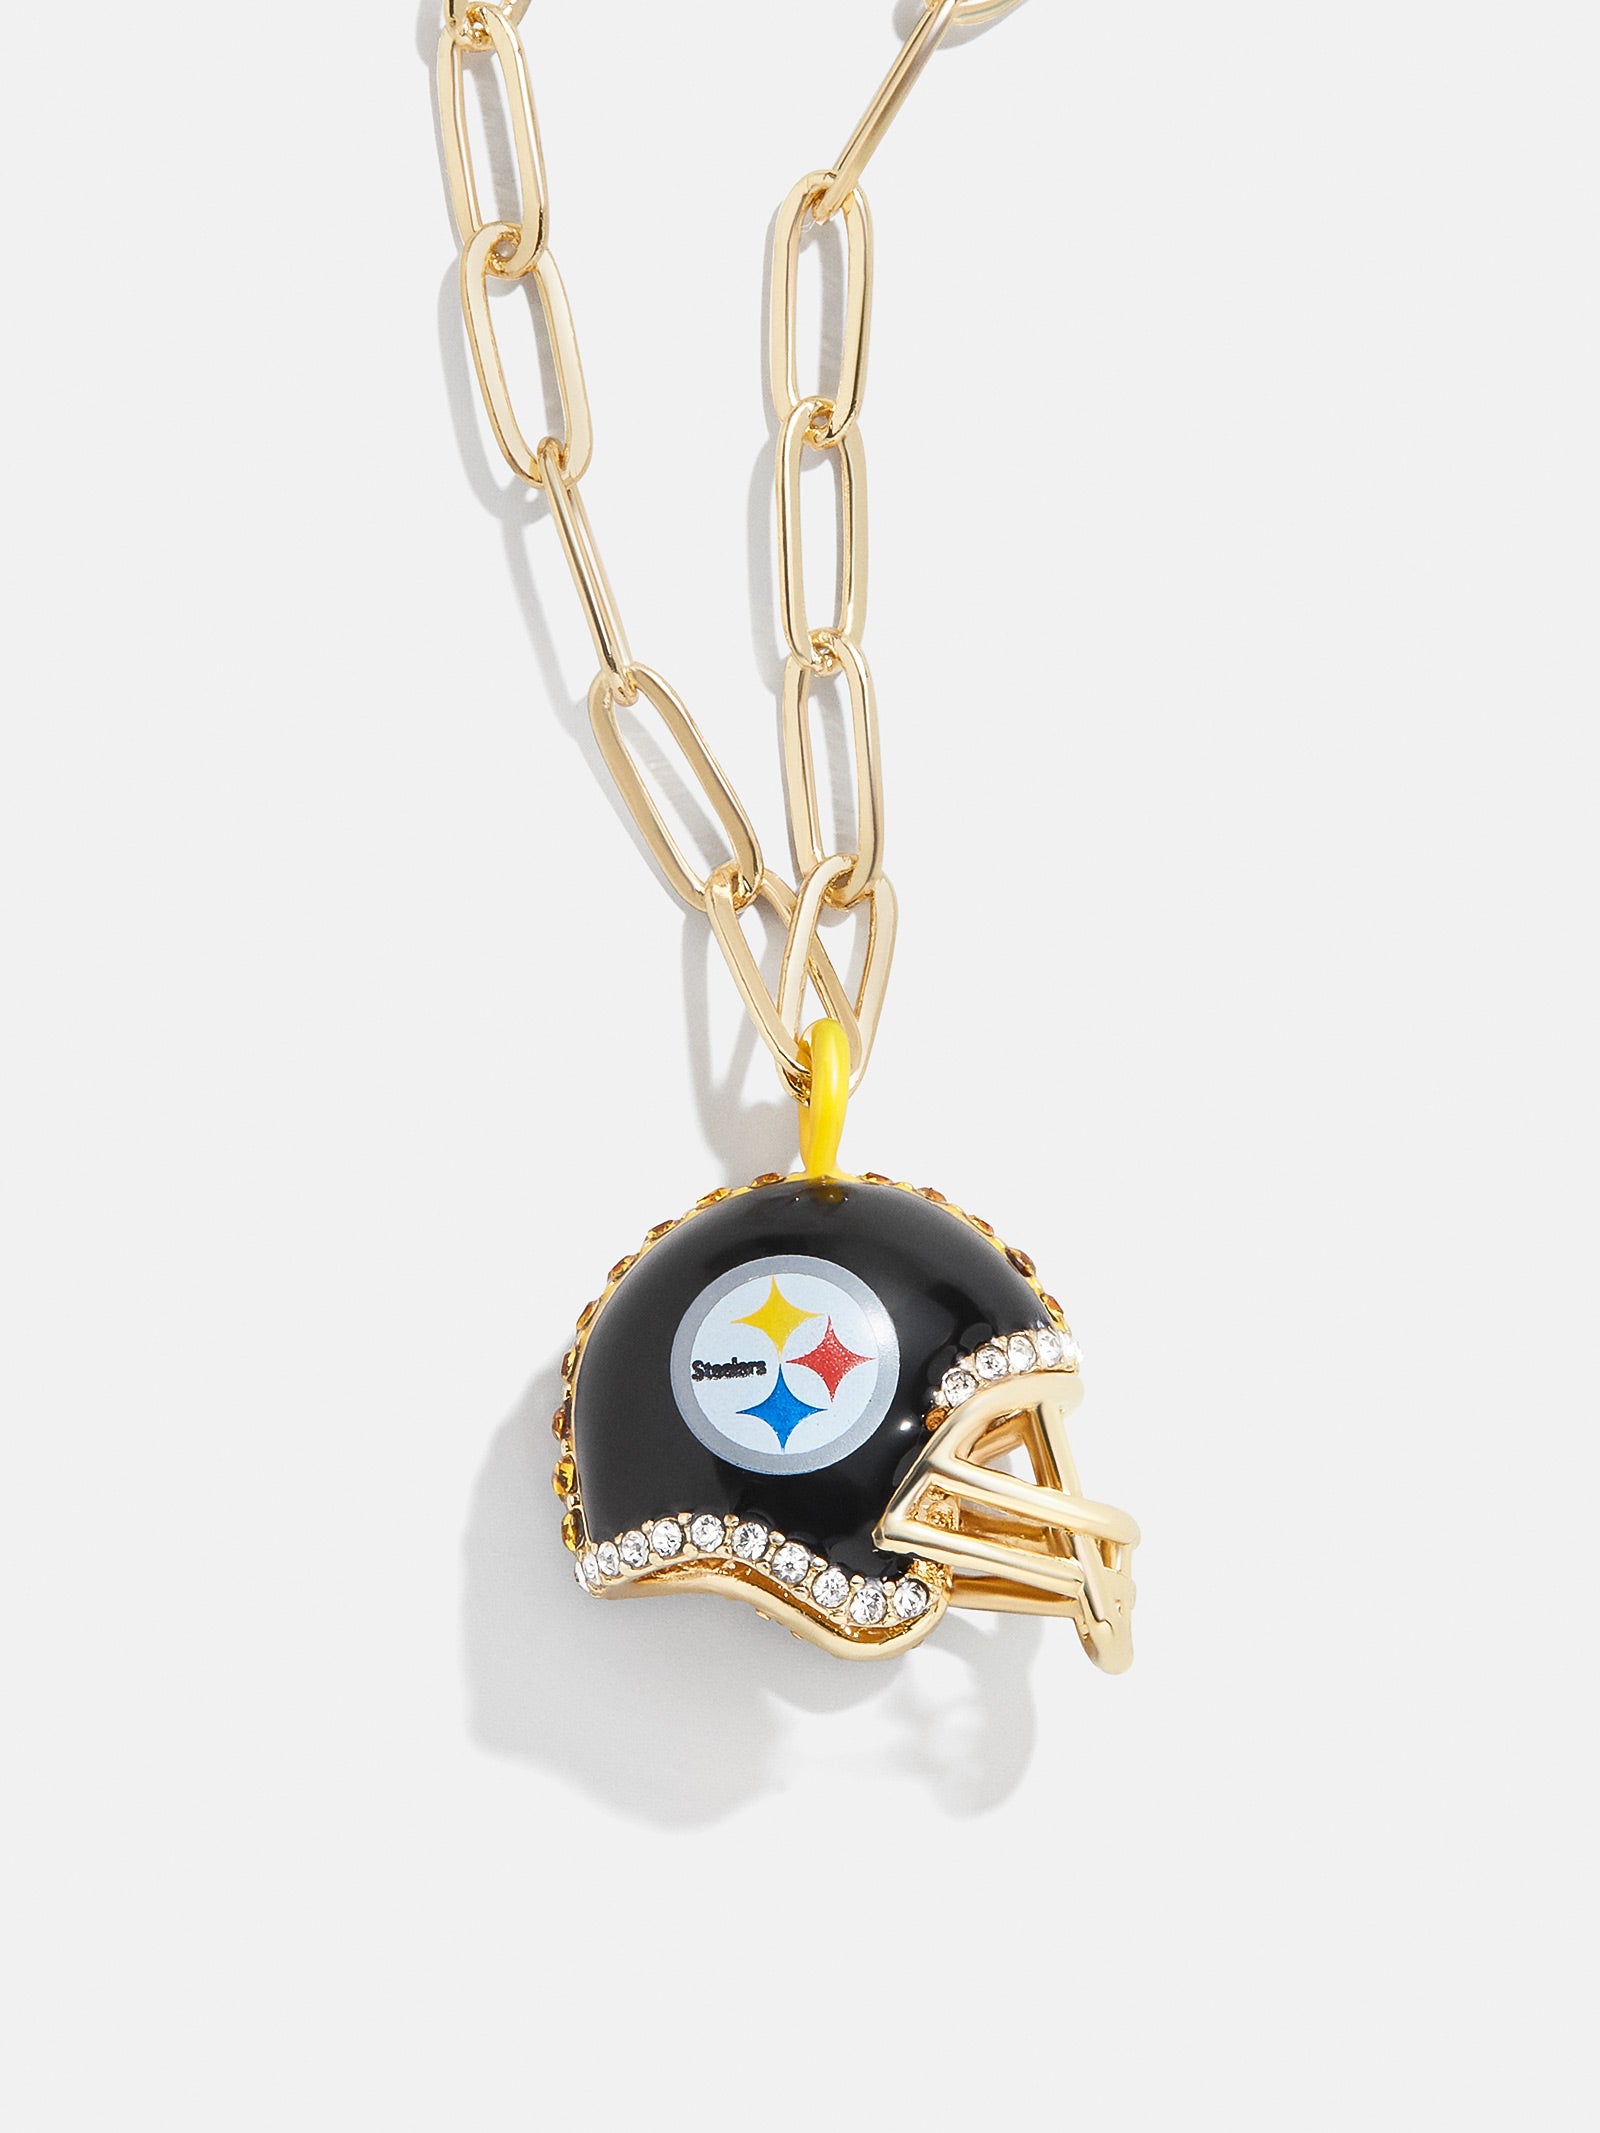 Baublebar Pittsburgh Steelers Gold Helmet Charm Necklace Gold